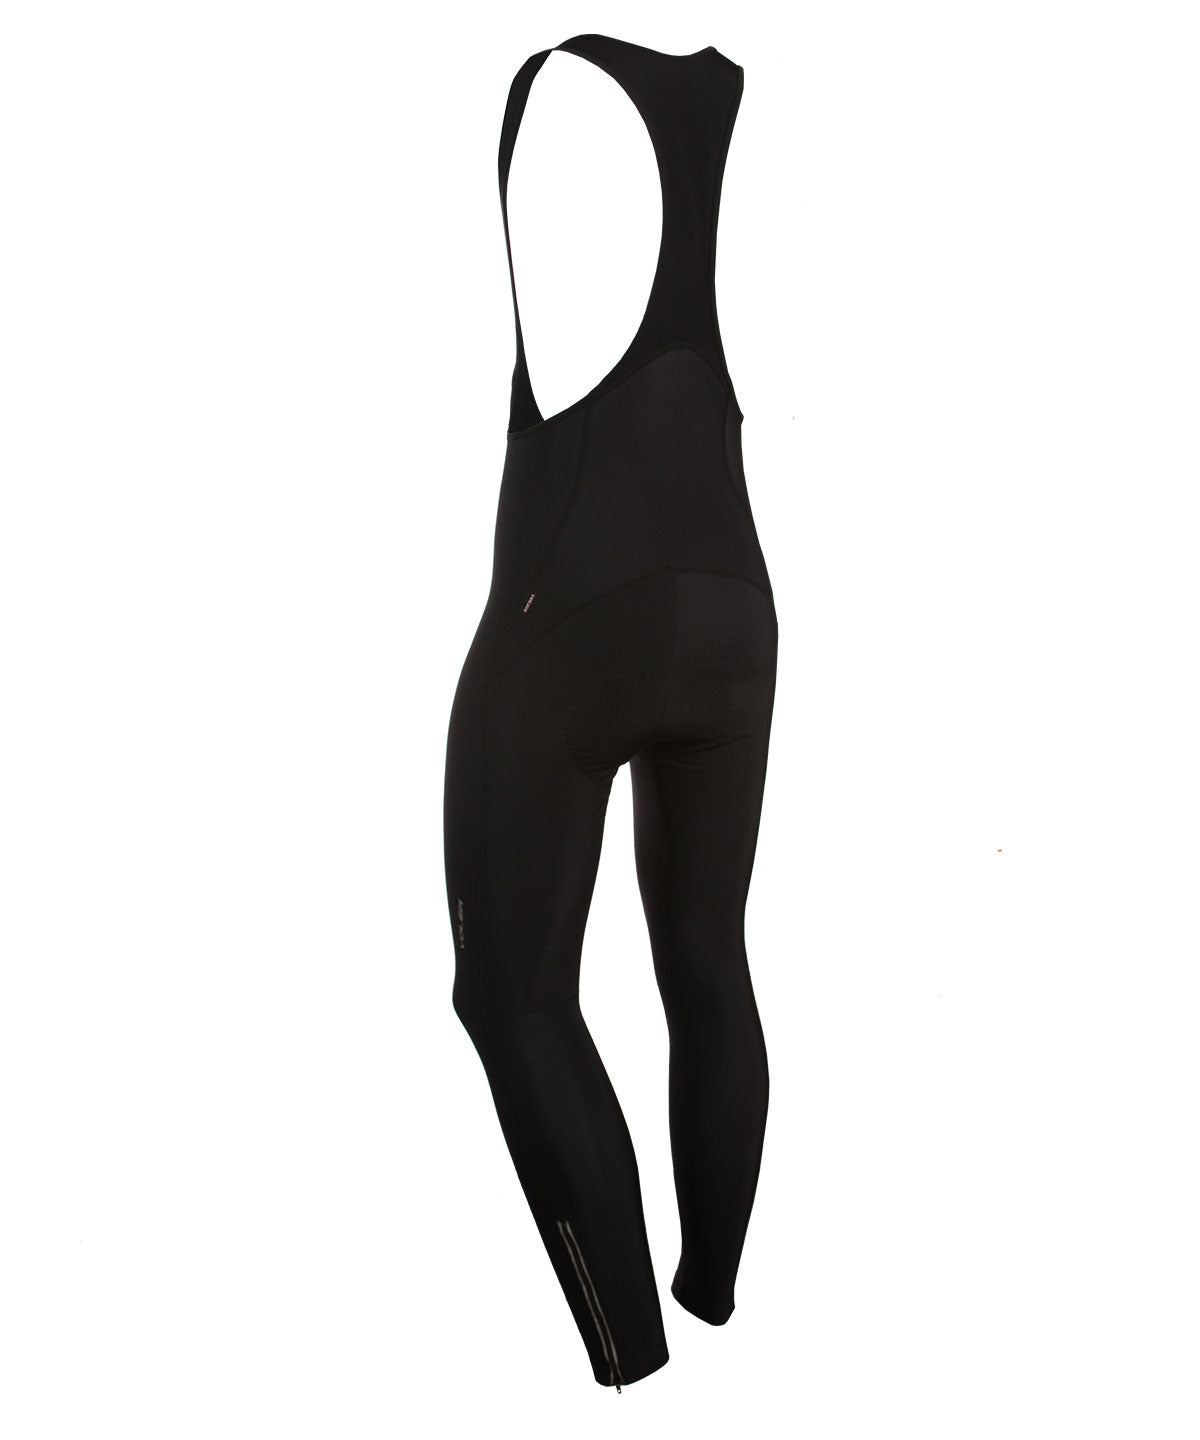 WoolTech Tights in Black ~ Windthrow